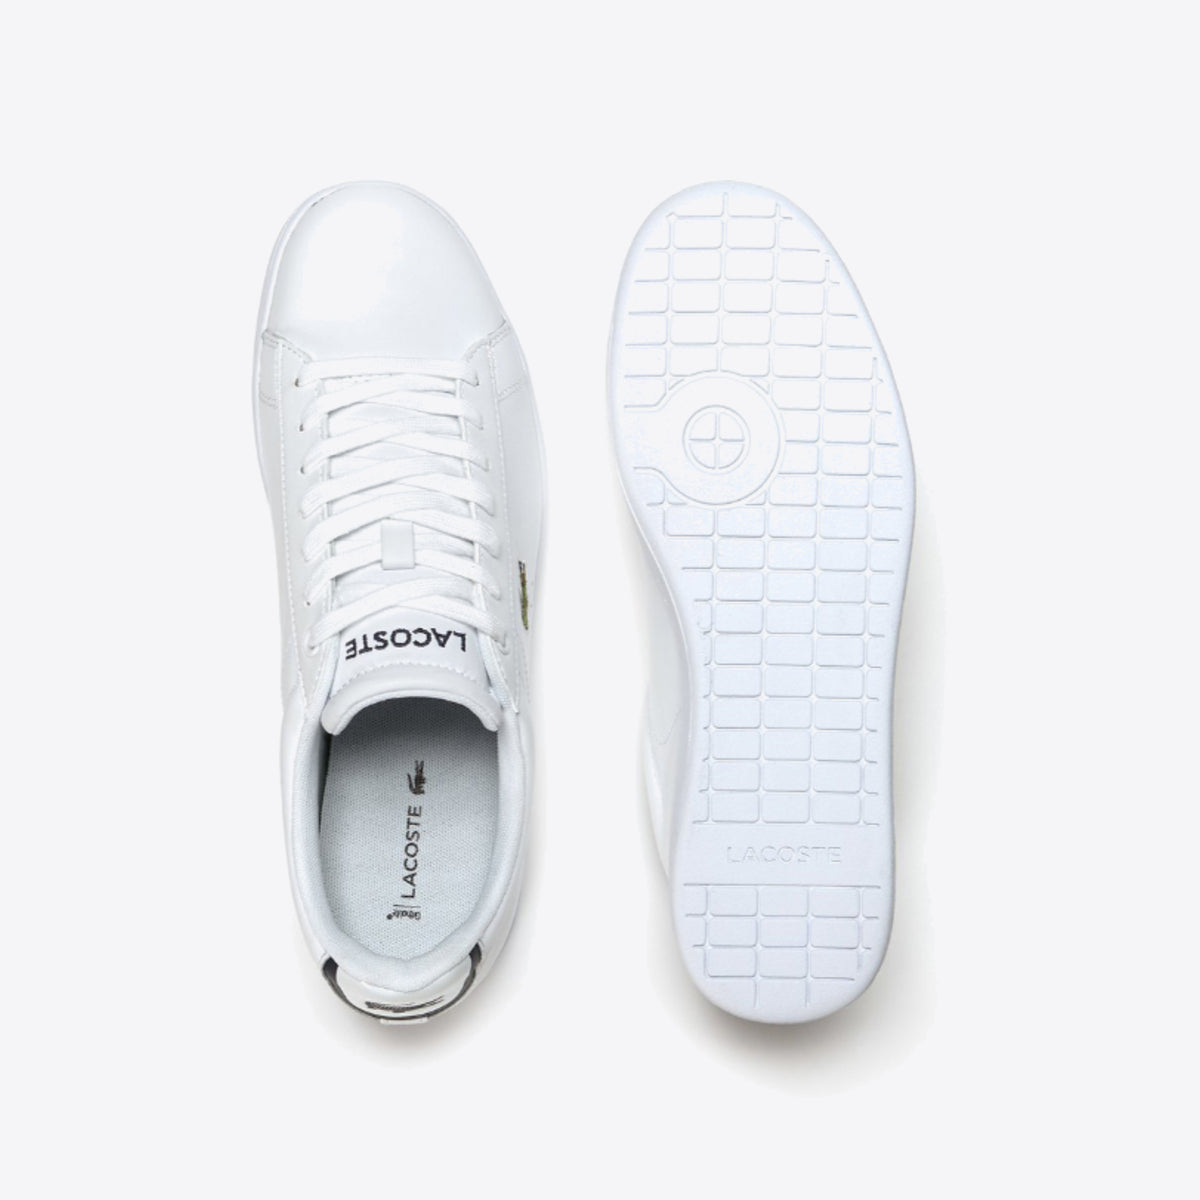 LACOSTE Carnaby Evo Trainer White - Image 5